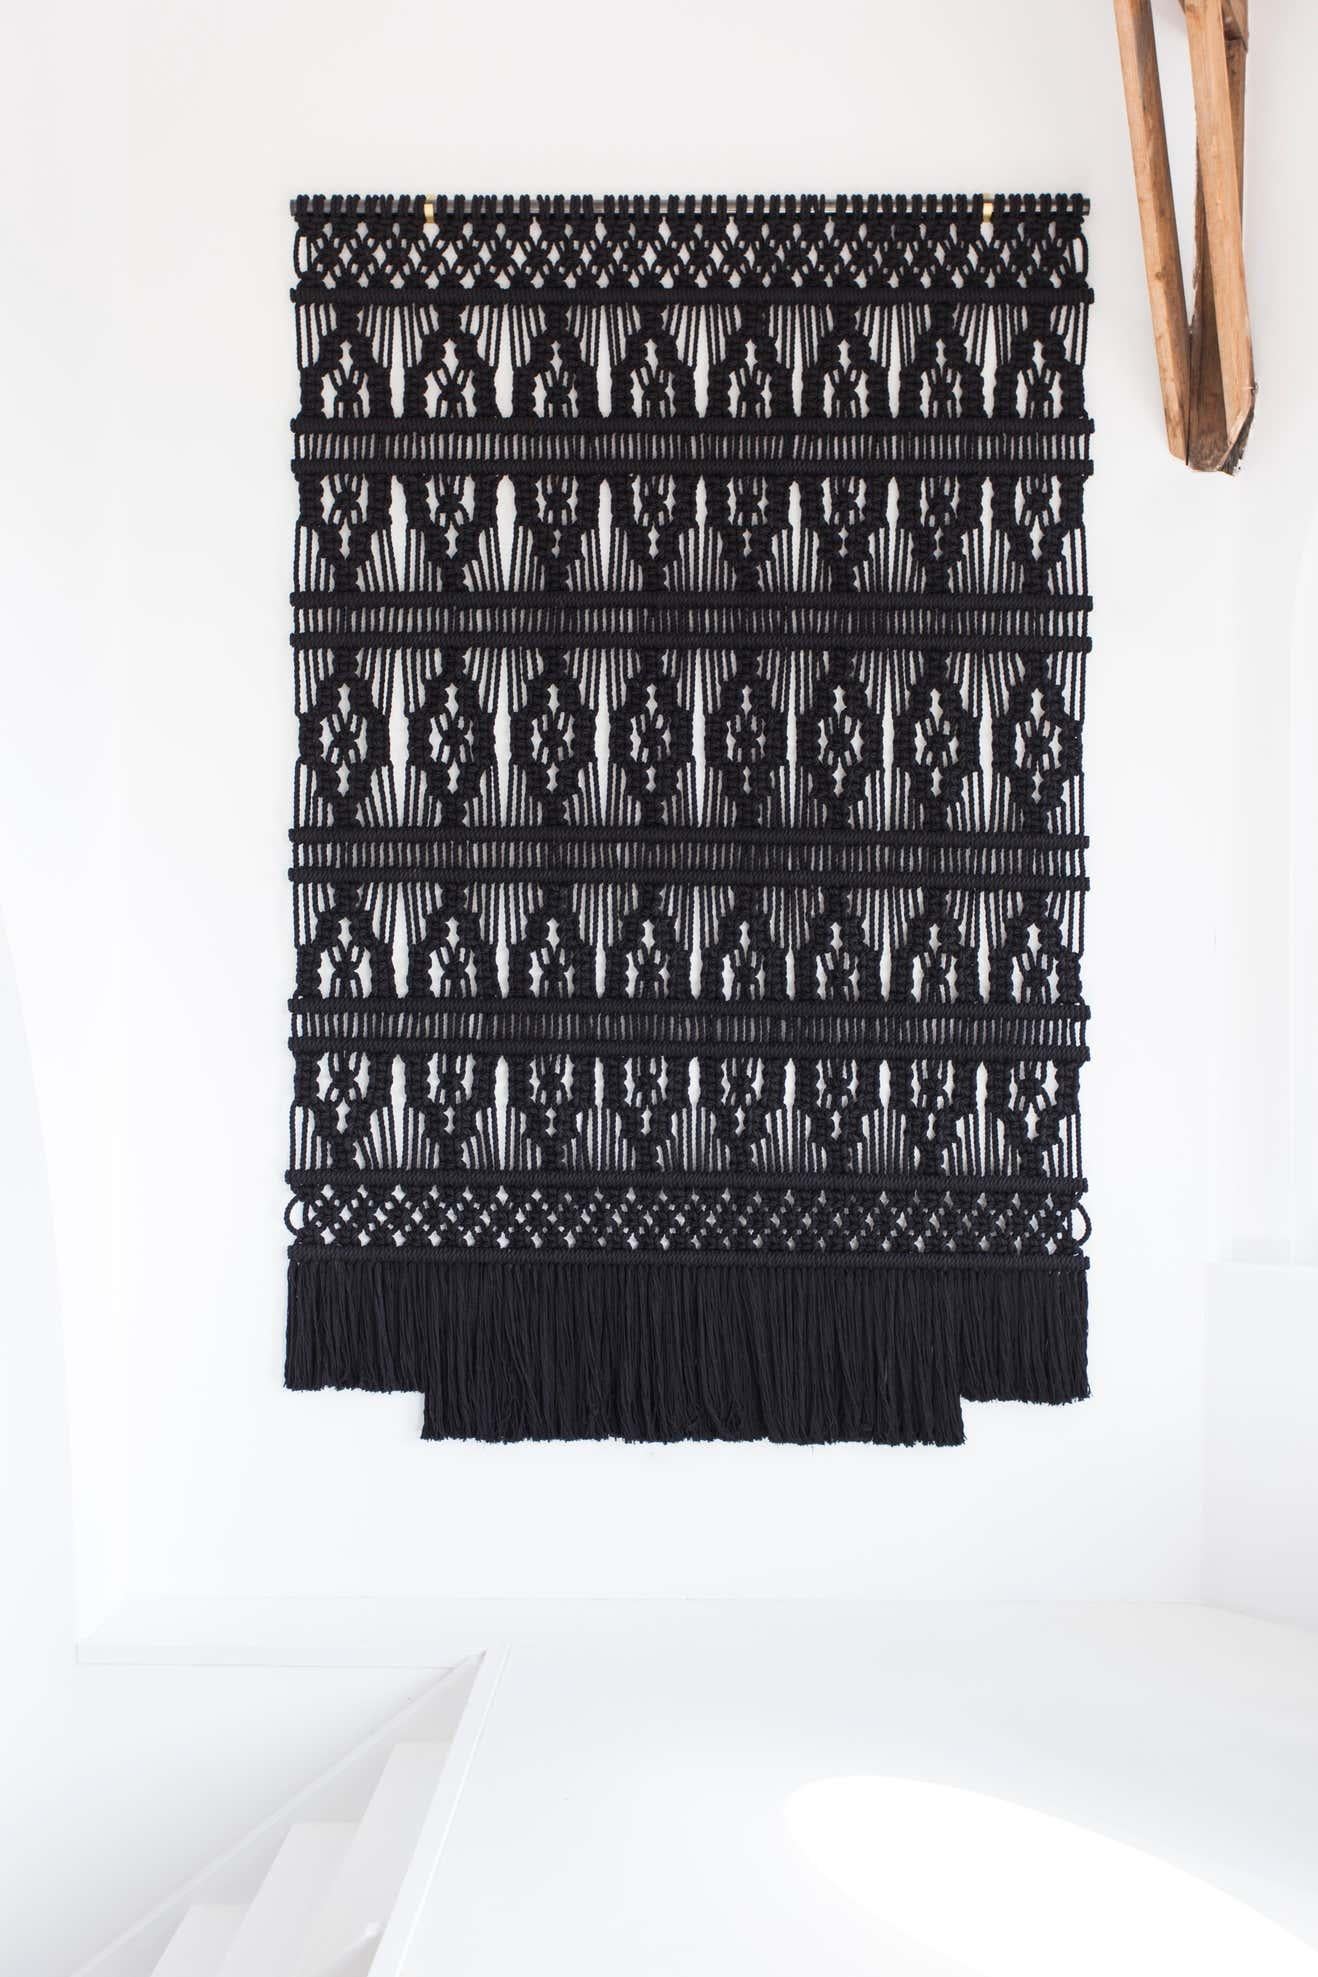 Black Wall Hanging Rug by Milla Novo
Dimensions: D180 x H280 cm
Materials: Black cotton rope
Weight: 35 kg

Milla Novo is an artist based in the Netherlands. She creates exclusive wallhangings for high-end interiors. These unique pieces of art